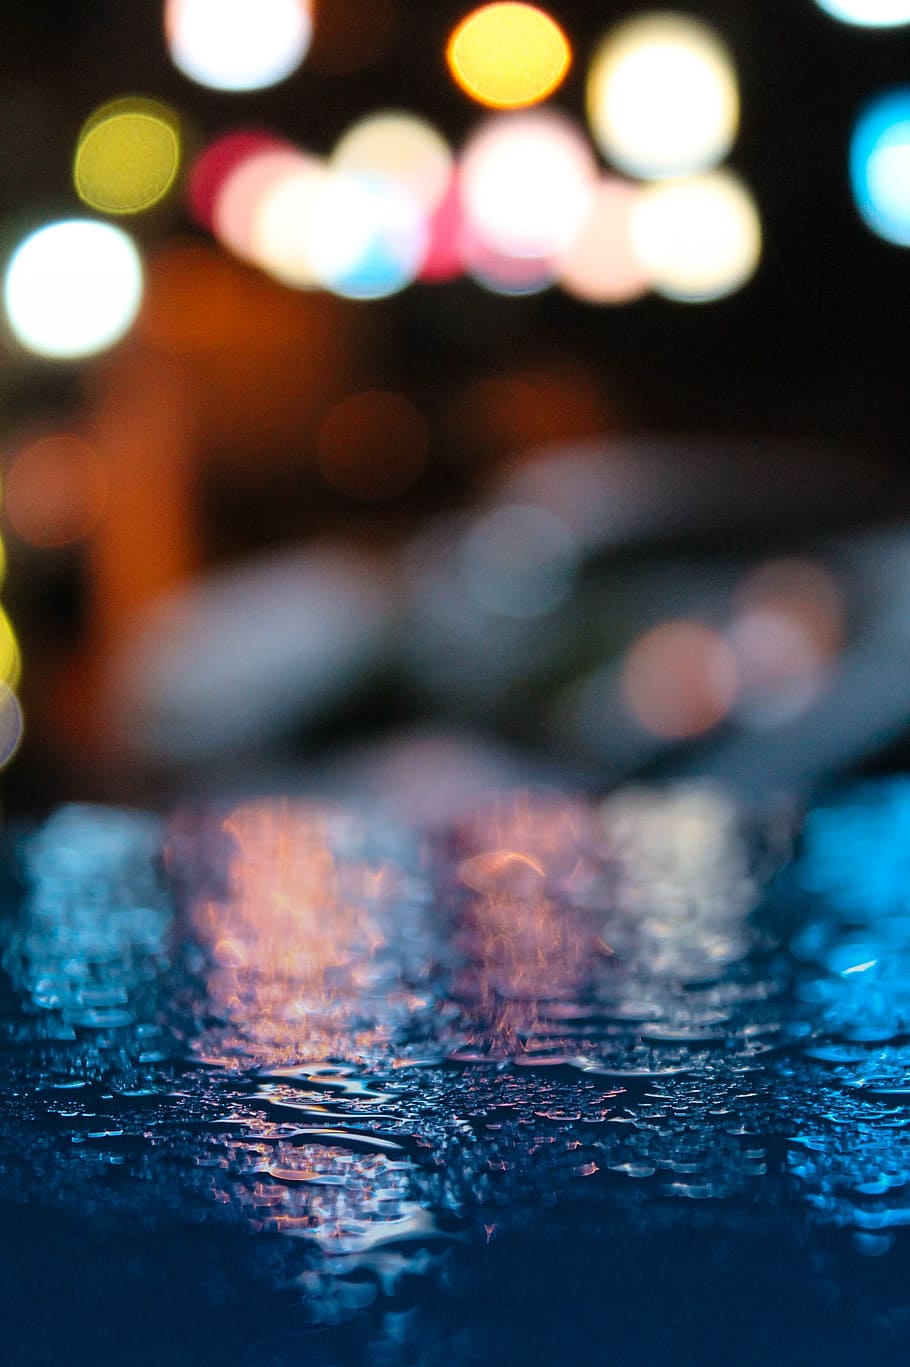 shining, celebration, summary, light, color, night life, twinkle, selective focus, close-up, indoors